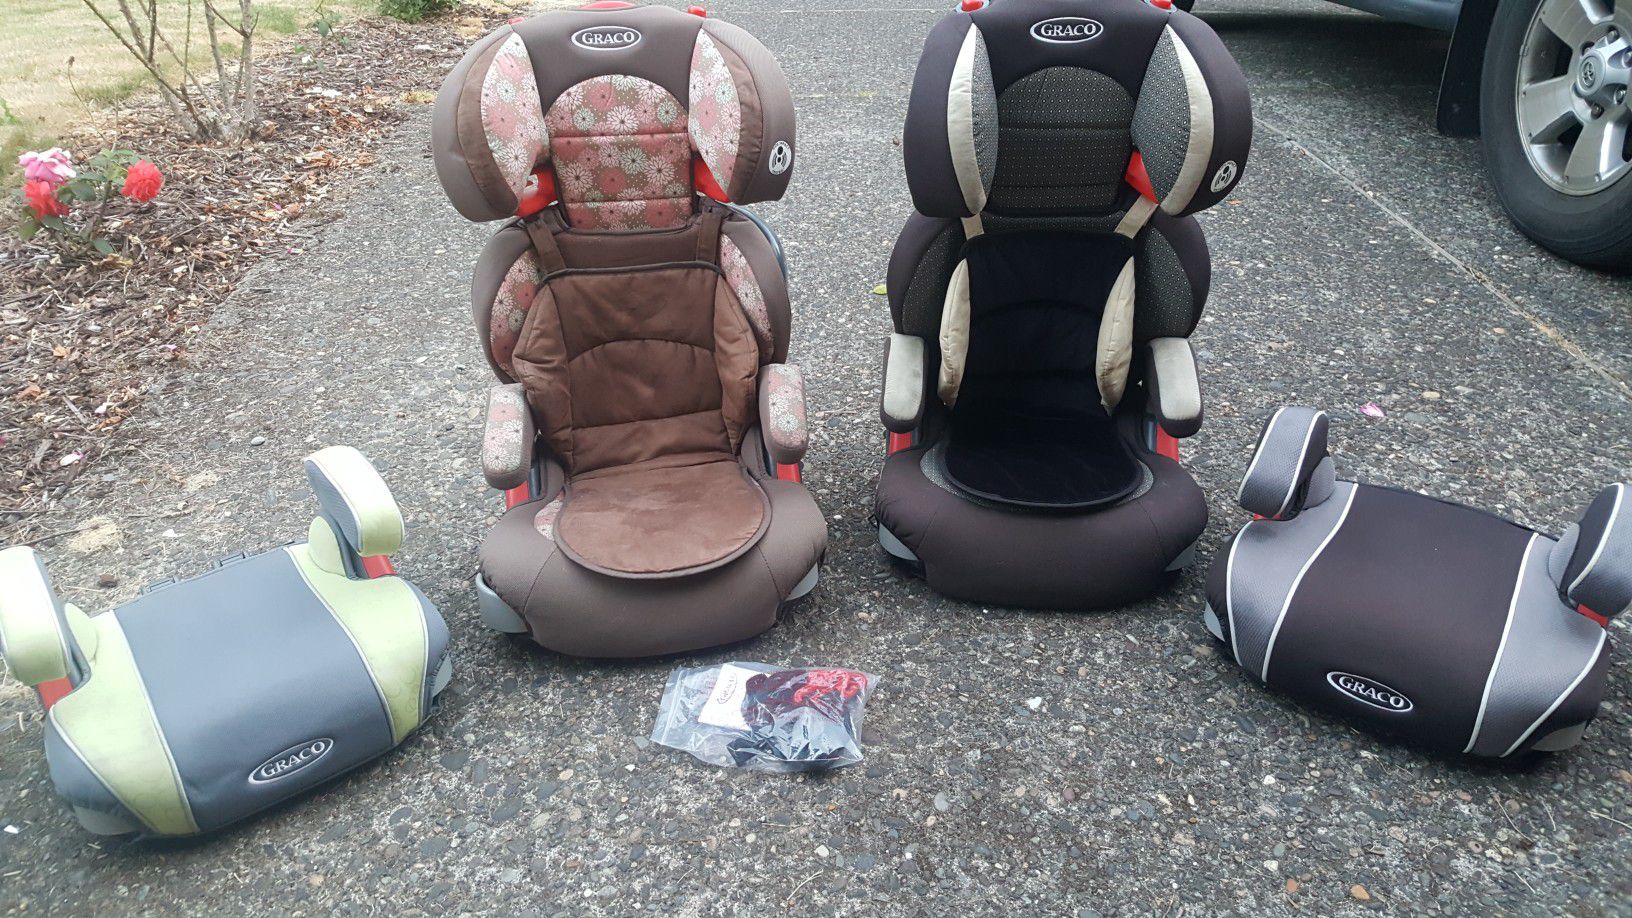 Graco booster and car seats